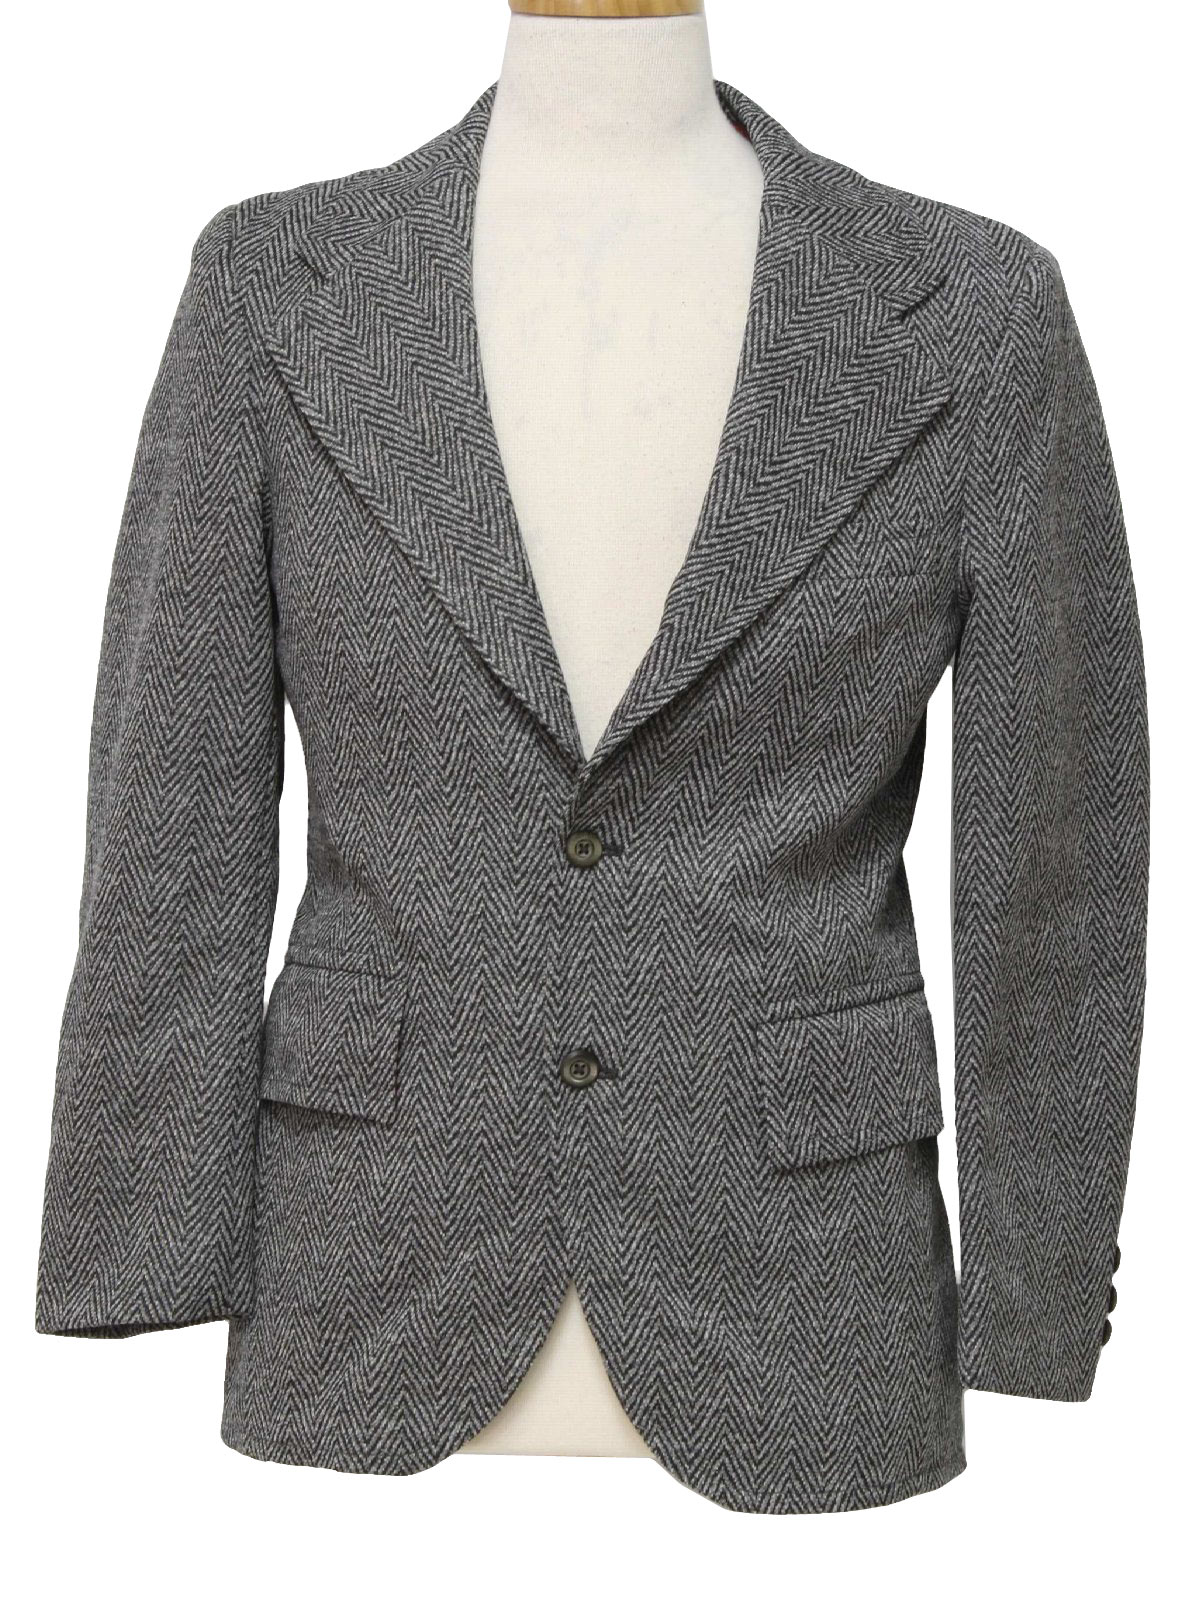 Derby Seventies Vintage Jacket: 70s -Derby- Mens shaded grey, off white ...